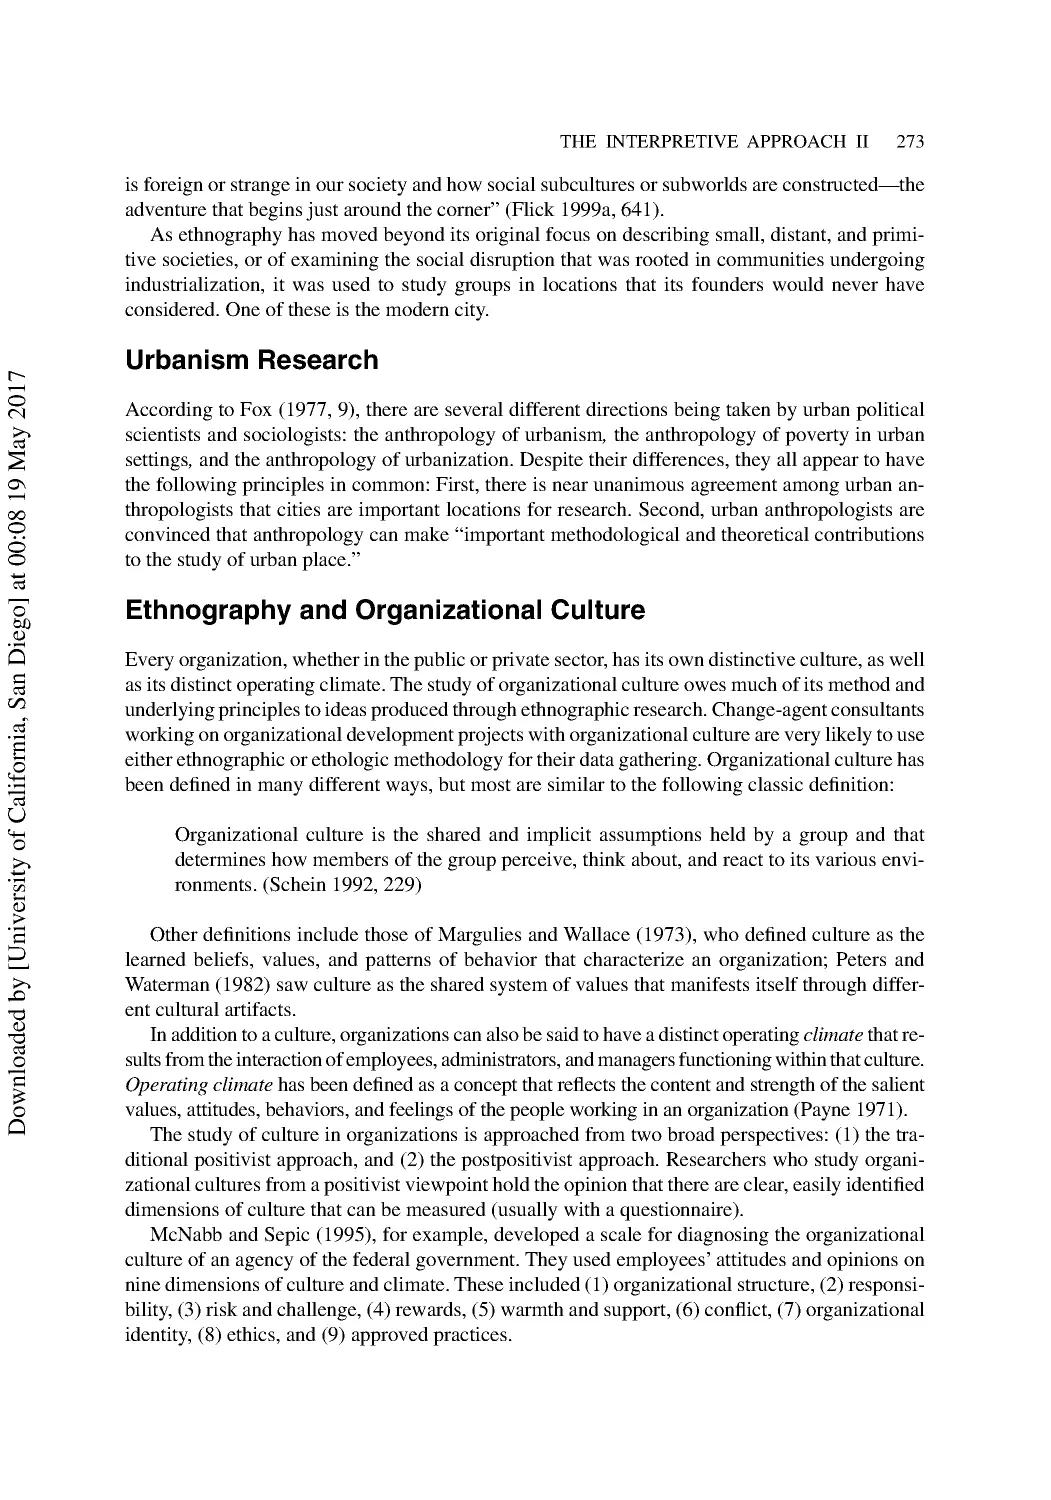 Urbanism Research
Ethnography and Organizational Culture